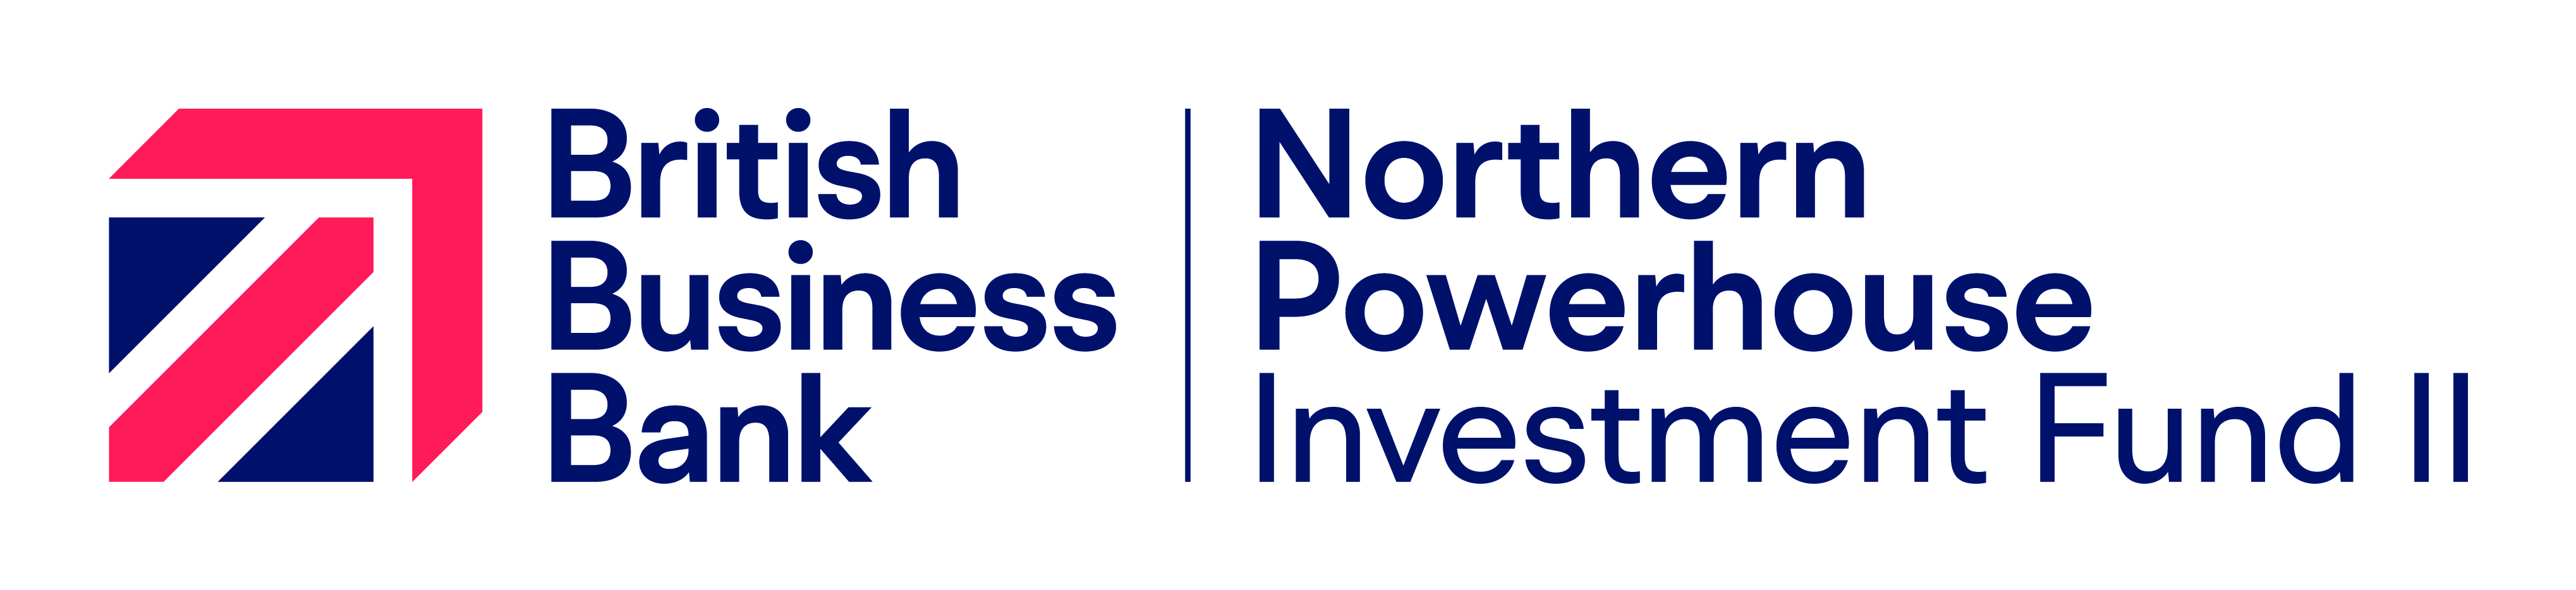 British Business Bank and northern powerhouse investment fund 2